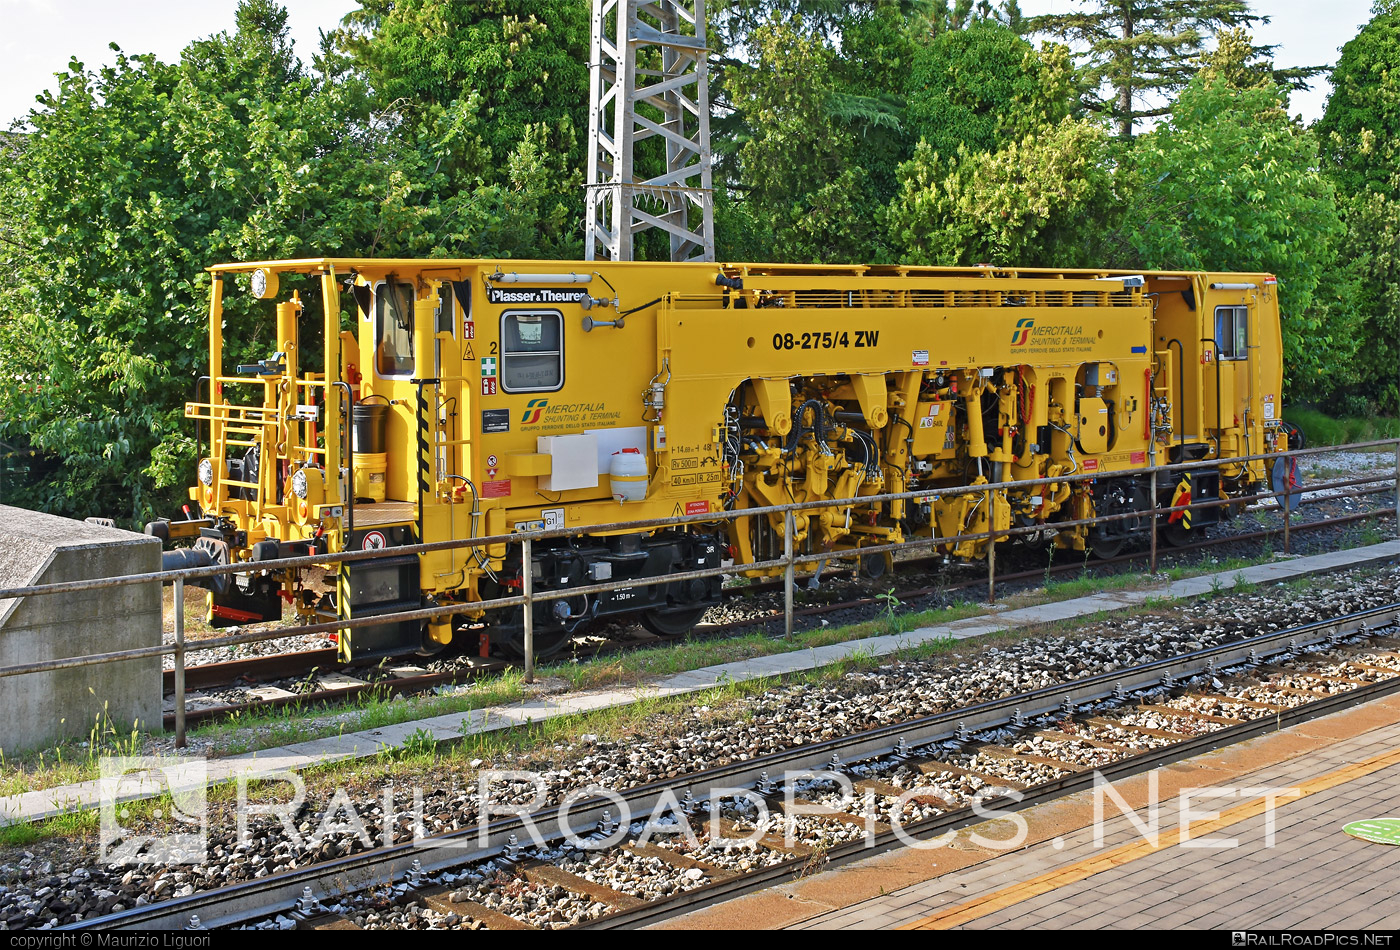 Plasser & Theurer Plassermatic 08-275/4 ZW-Y - Unknown vehicle ID operated by Mercitalia Shunting & Terminal S.r.l. #MercitaliaShuntingAndTerminal #MercitaliaShuntingAndTerminalSrl #ferroviedellostato #fs #fsitaliane #mercitalia #plasserandtheurer #plassermatic #plassermatic082754zwy #plassertheurer